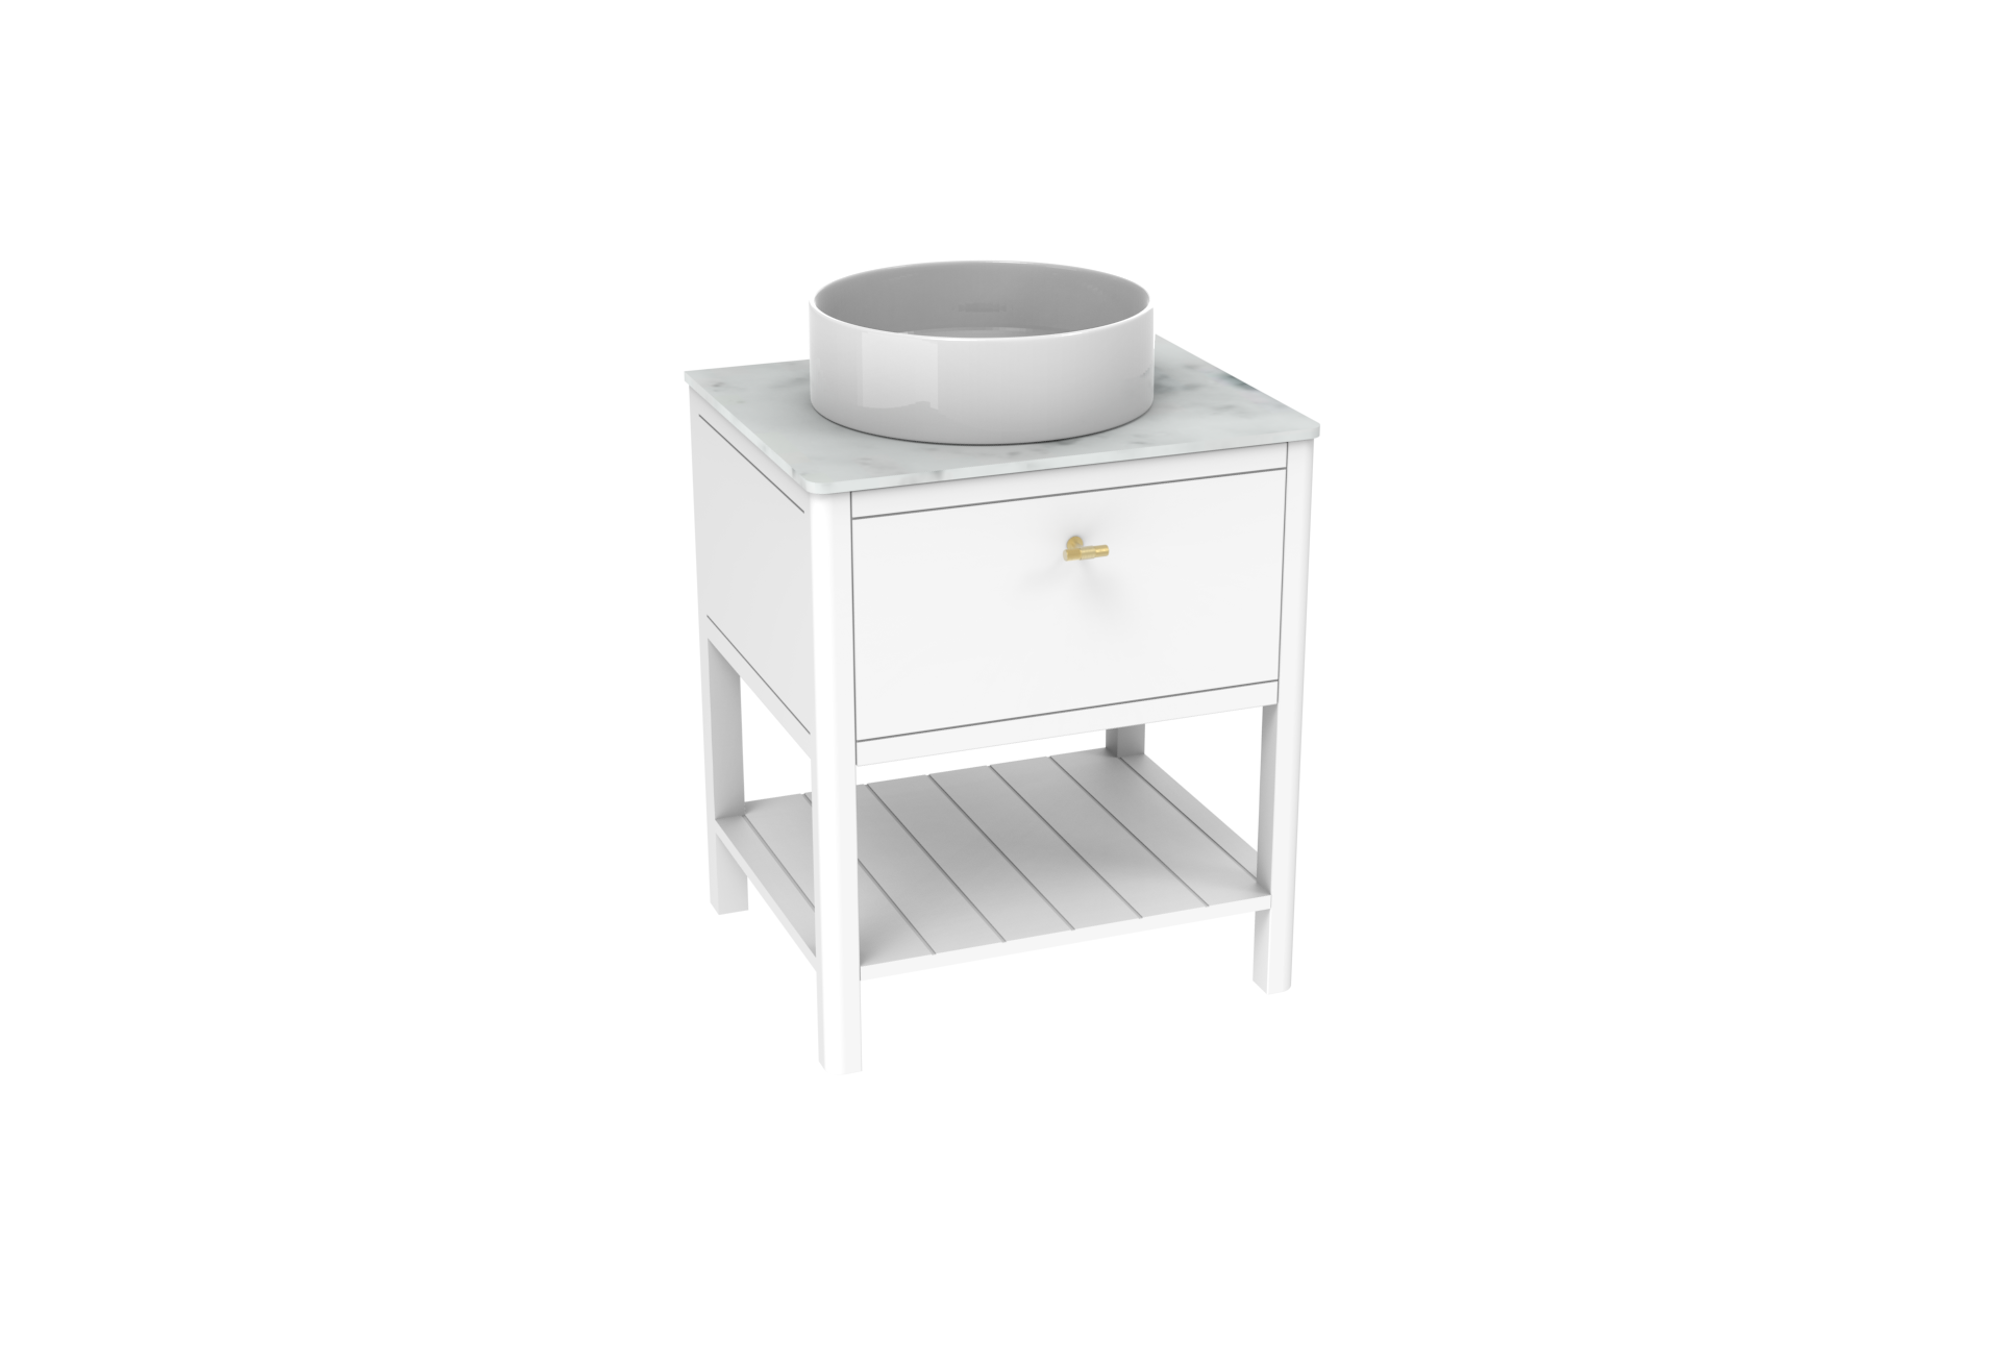 The New FRONTIER 60cm 1 drawer floor standing unit with undermount tray - Matte White